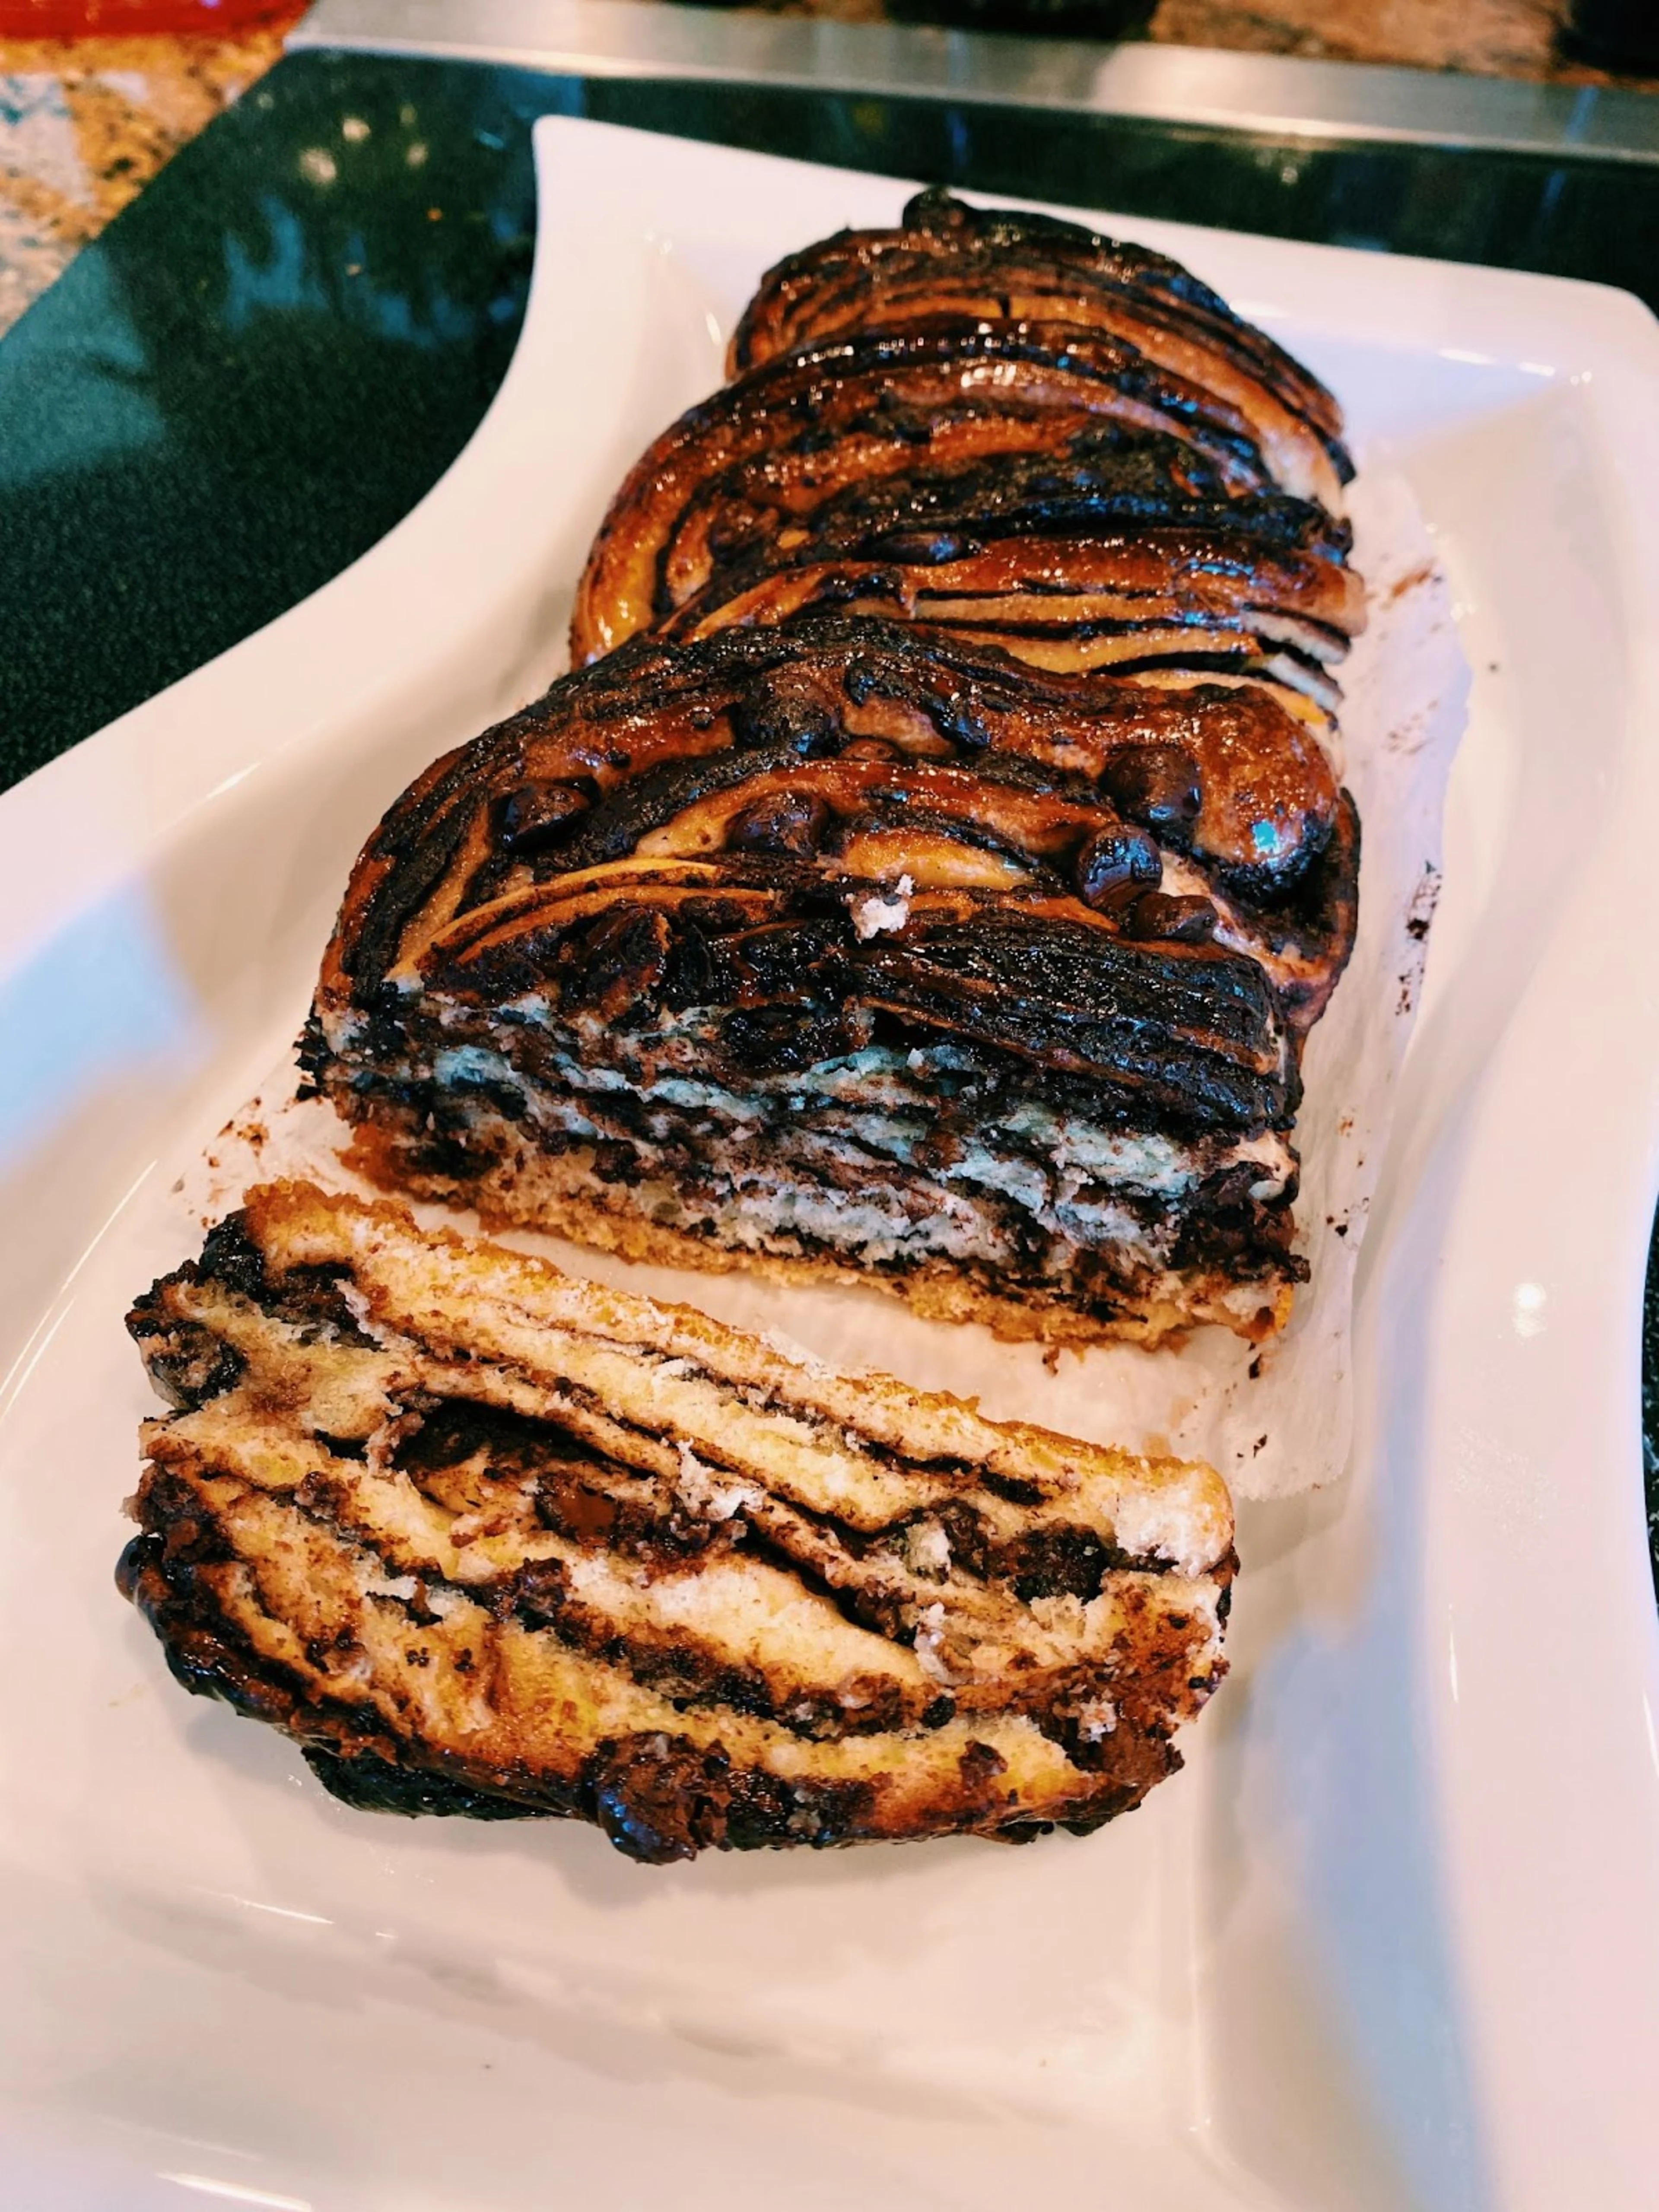 One of Kevin's favorite pandemic creations, this chocolate babka.